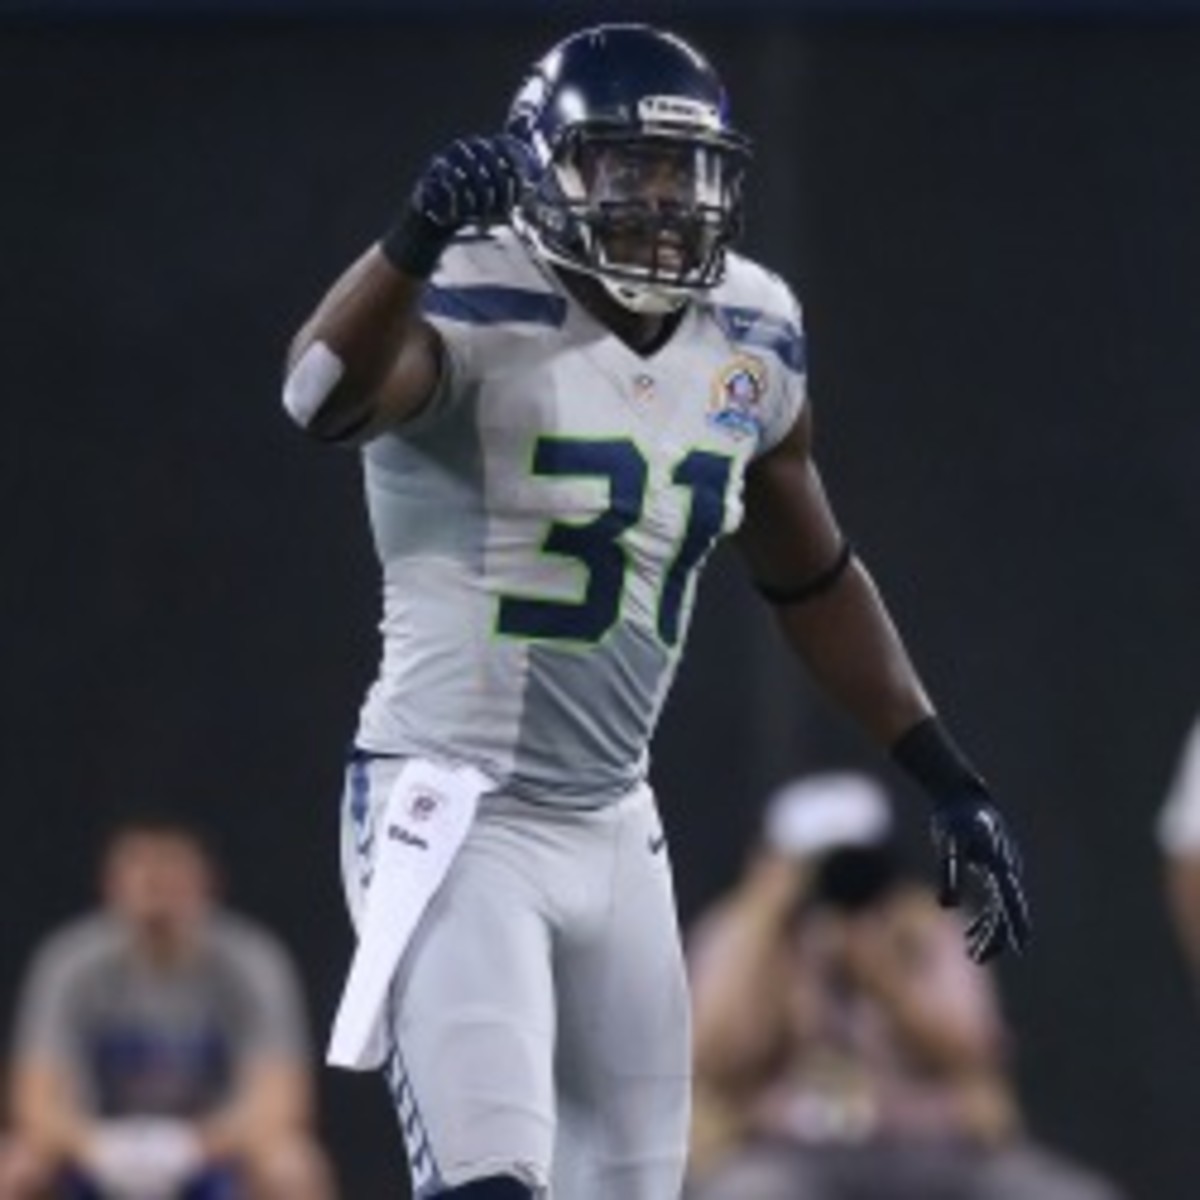 Seahawks safety Kam Chancellor received a $35 million contract extension. (Tom Szczerbowski/Getty Images)